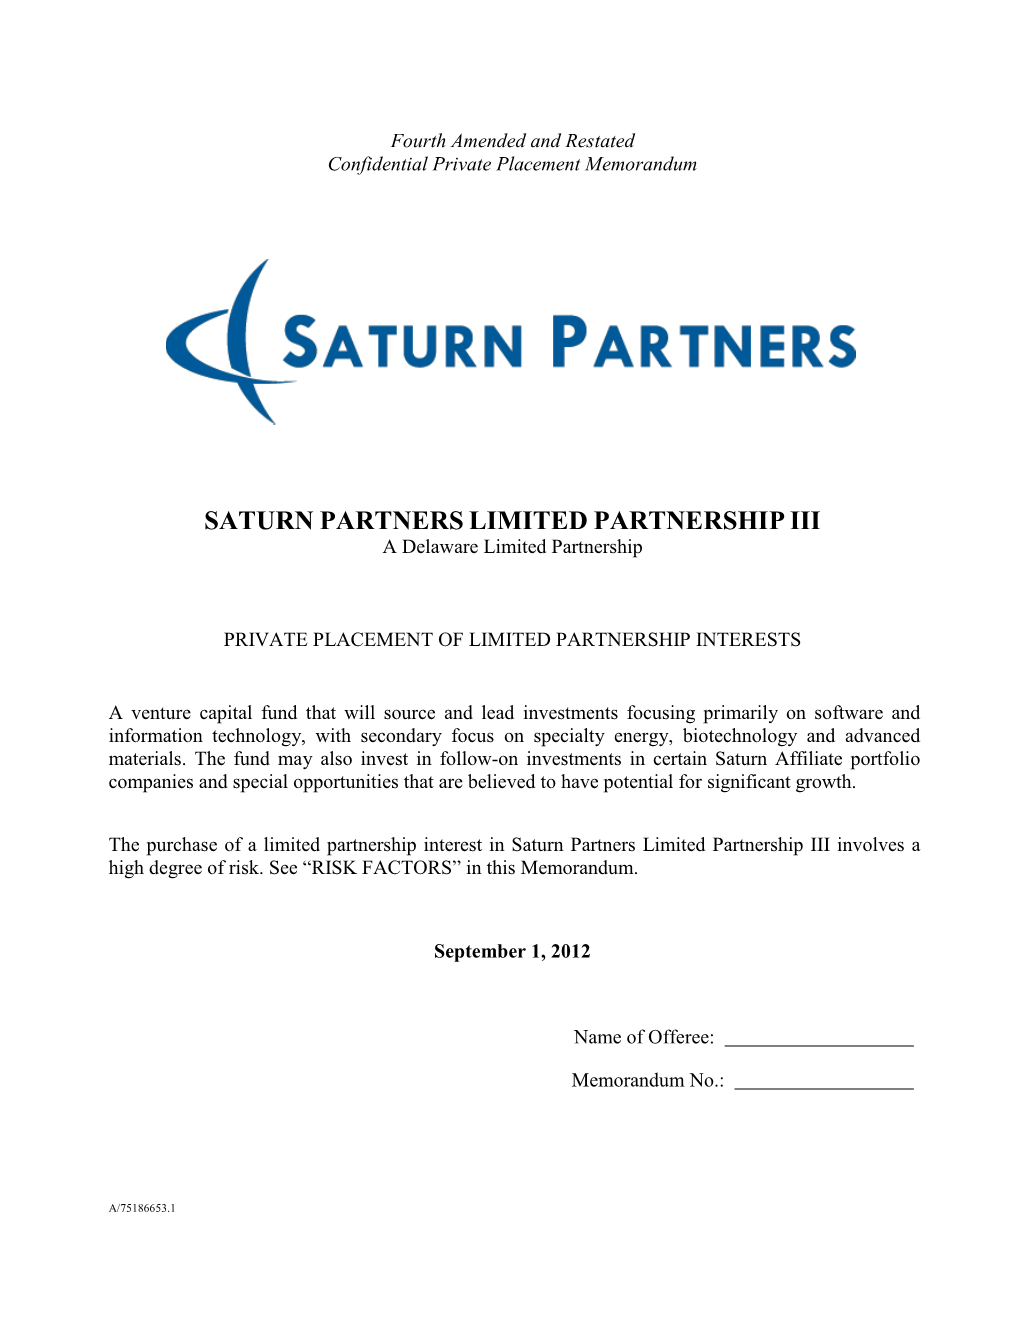 SATURN PARTNERS LIMITED PARTNERSHIP III a Delaware Limited Partnership